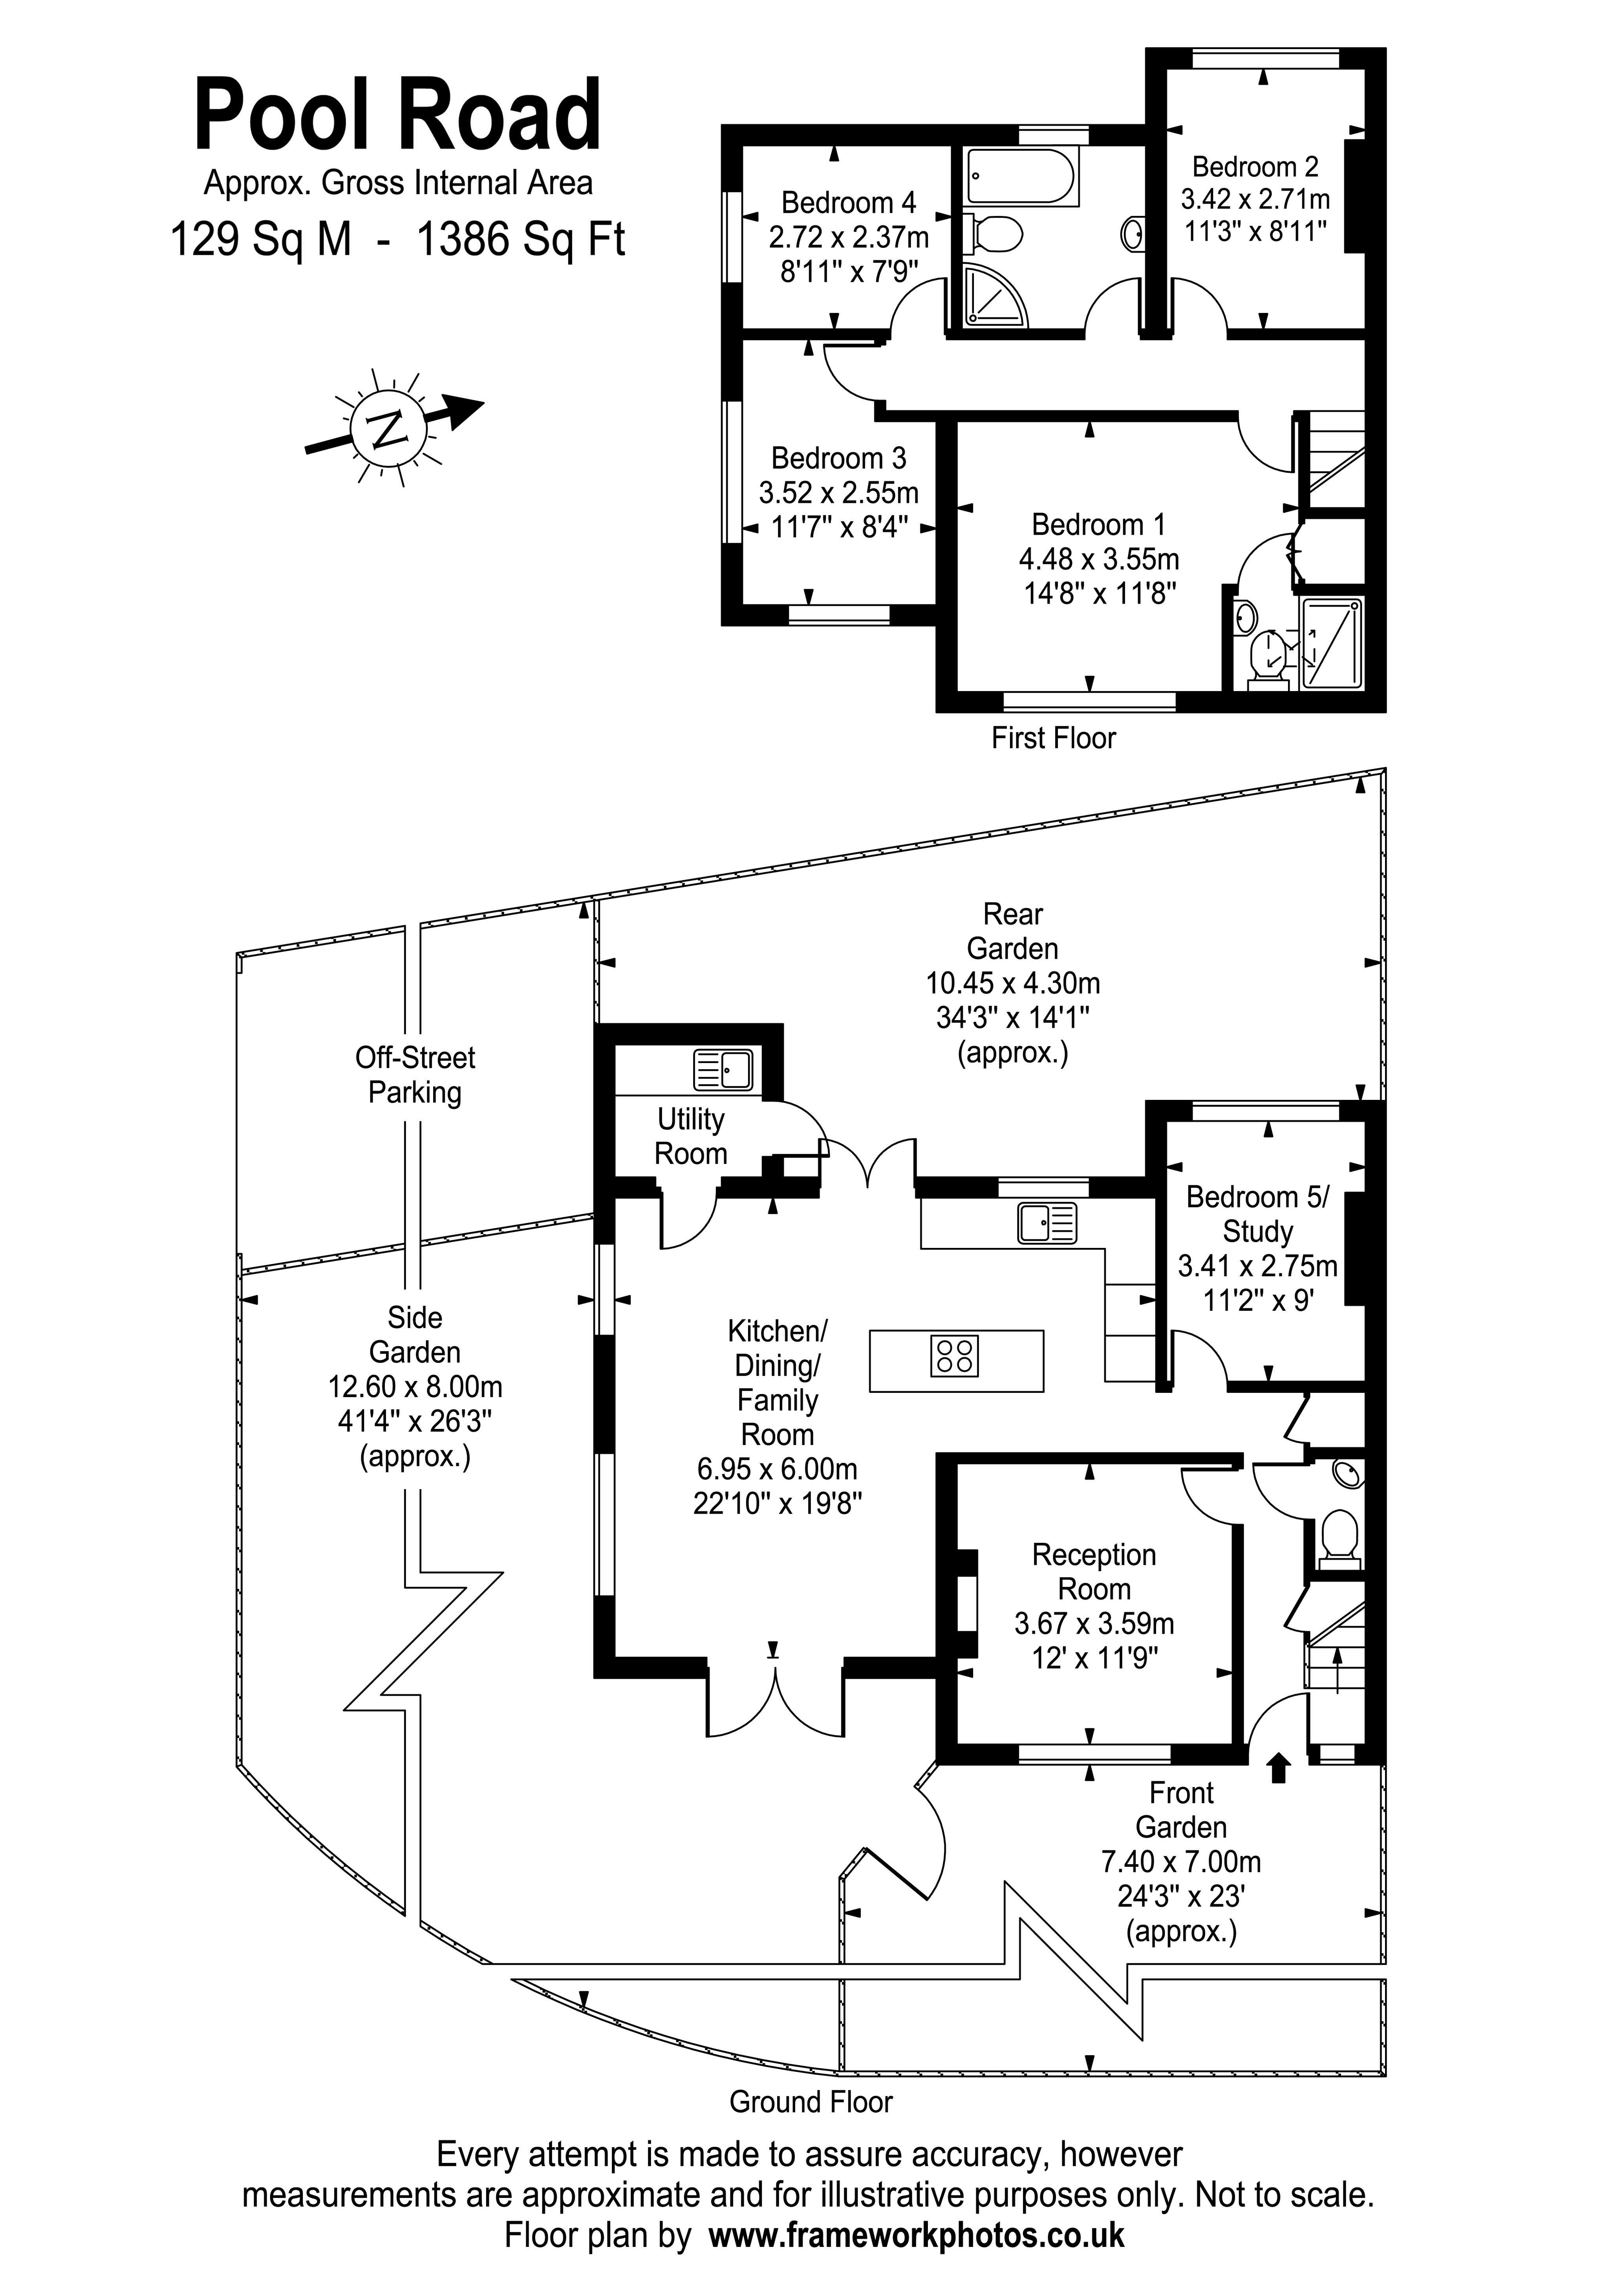 Floorplans For Pool Road, West Molesey